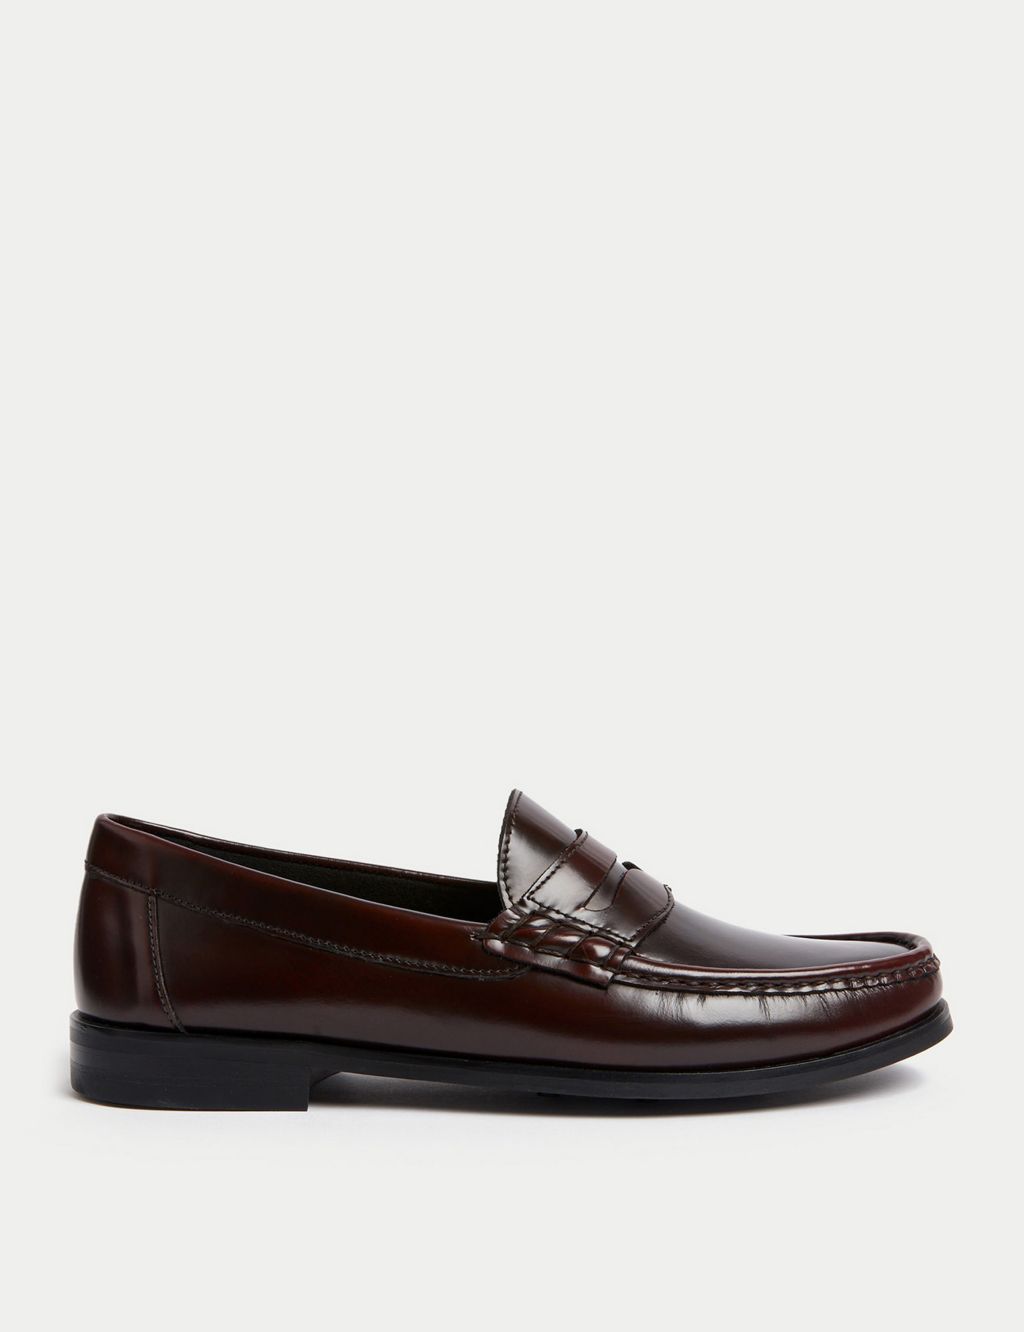 Men’s Loafers | M&S